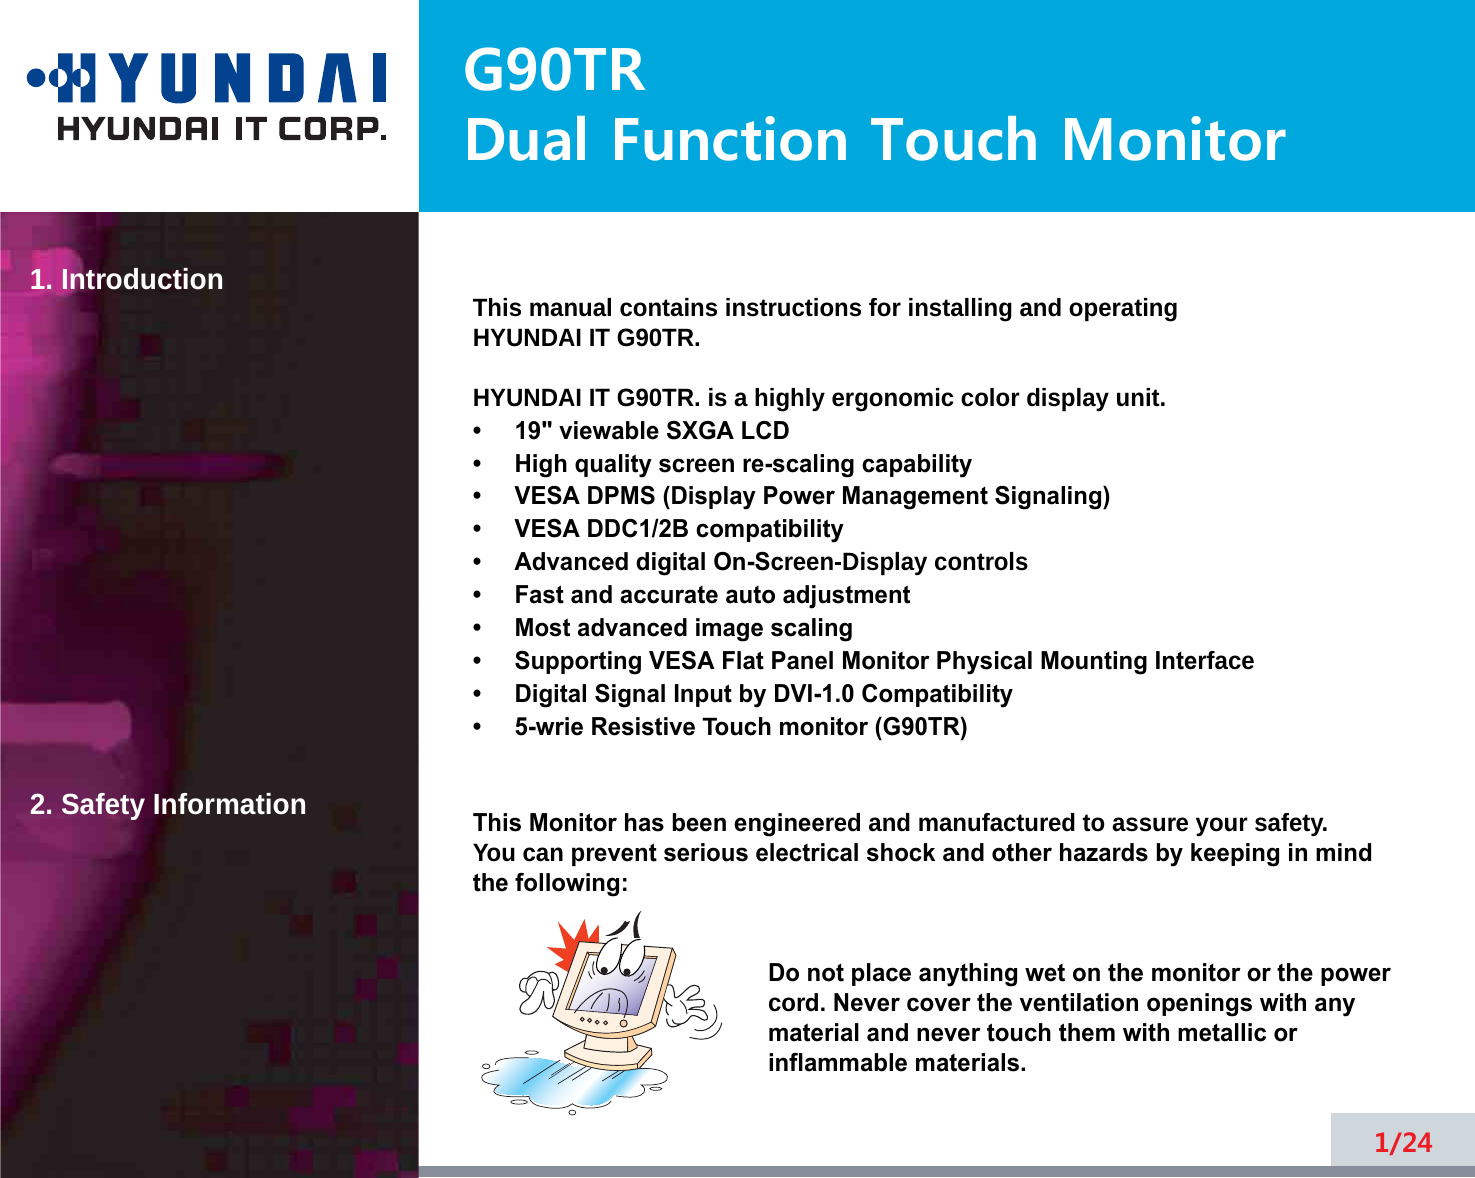 G90TRDual Function Touch Monitor1. Introduction2. Safety Information1/24This manual contains instructions for installing and operatingHYUNDAI IT G90TR.HYUNDAI IT G90TR. is a highly ergonomic color display unit.•     19&quot; viewable SXGA LCD•     High quality screen re-scaling capability•     VESA DPMS (Display Power Management Signaling)•     VESA DDC1/2B compatibility•     Advanced digital On-Screen-Display controls•     Fast and accurate auto adjustment  •     Most advanced image scaling•     Supporting VESA Flat Panel Monitor Physical Mounting Interface•     Digital Signal Input by DVI-1.0 Compatibility •     5-wrie Resistive Touch monitor (G90TR)This Monitor has been engineered and manufactured to assure your safety. You can prevent serious electrical shock and other hazards by keeping in mind the following:Do not place anything wet on the monitor or the powercord. Never cover the ventilation openings with anymaterial and never touch them with metallic or inflammable materials.